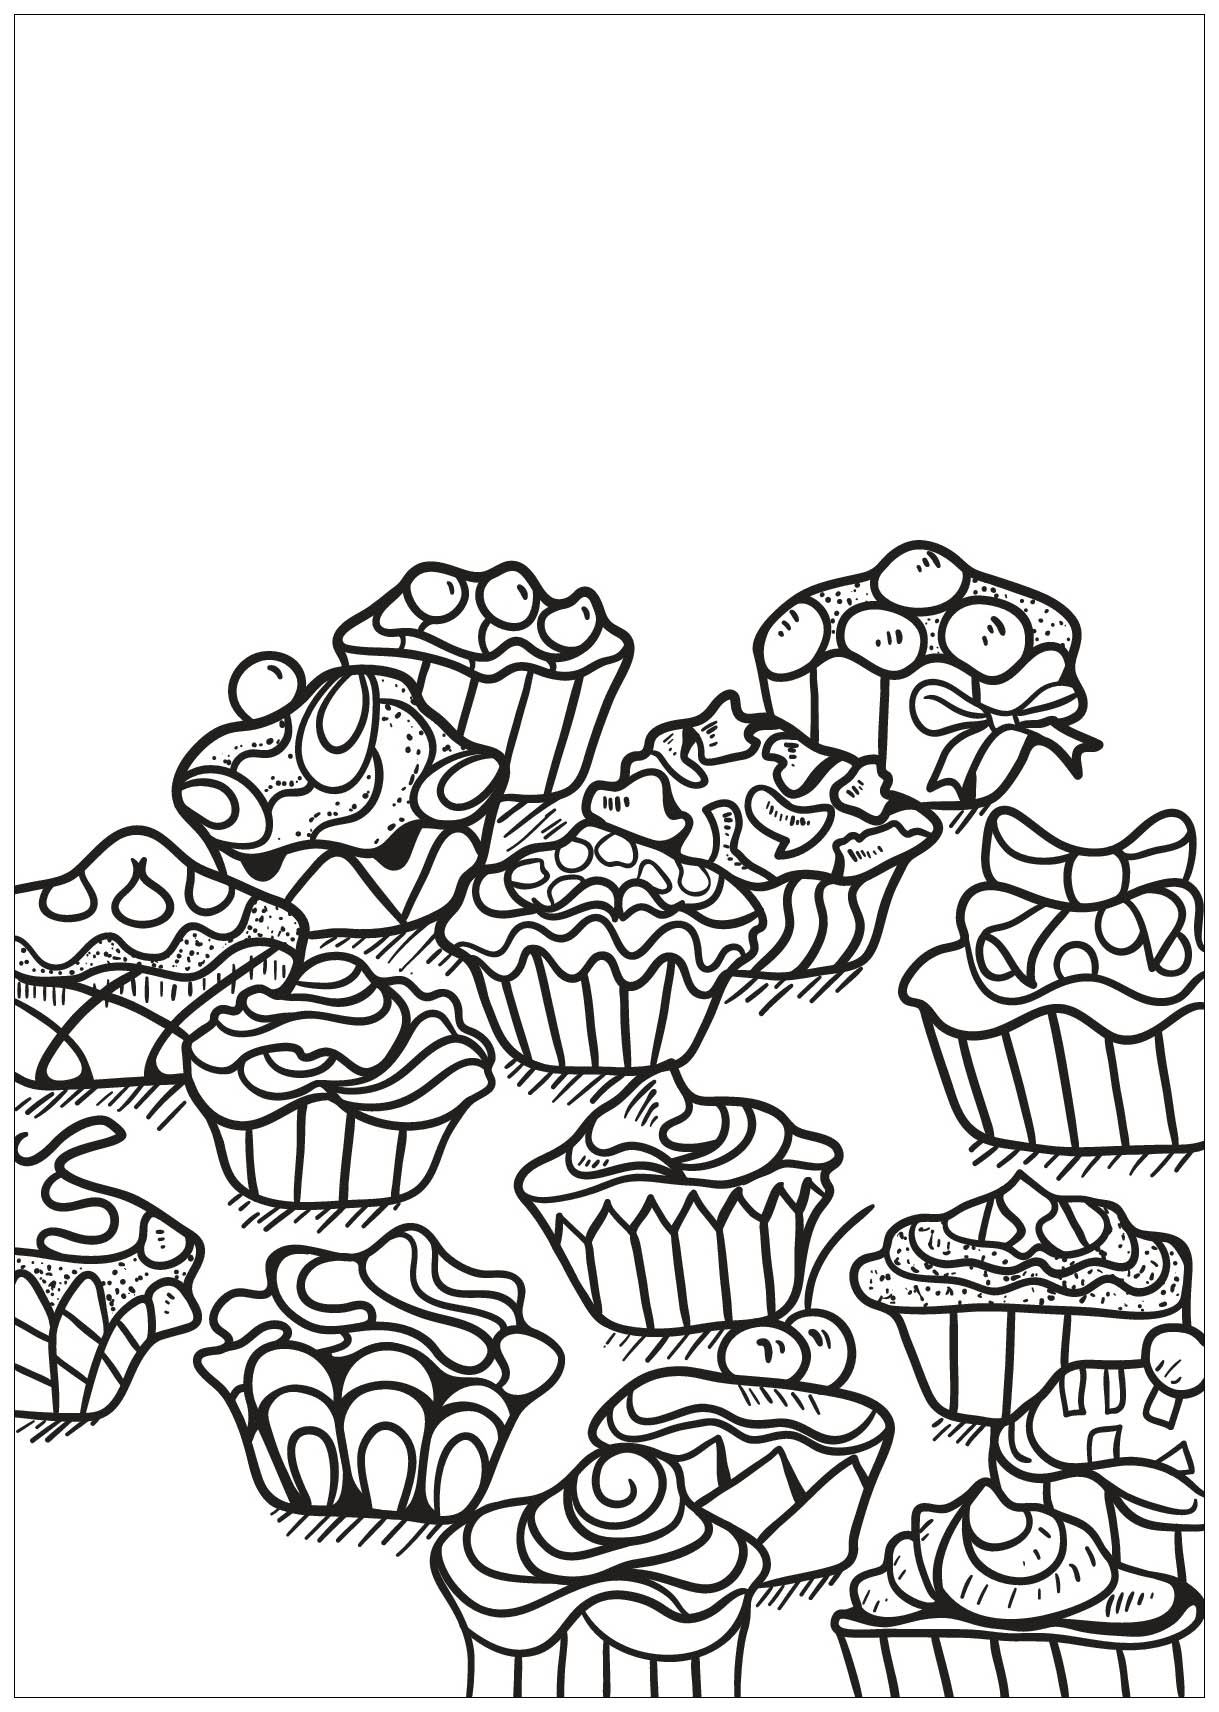 Cup cakes 44034